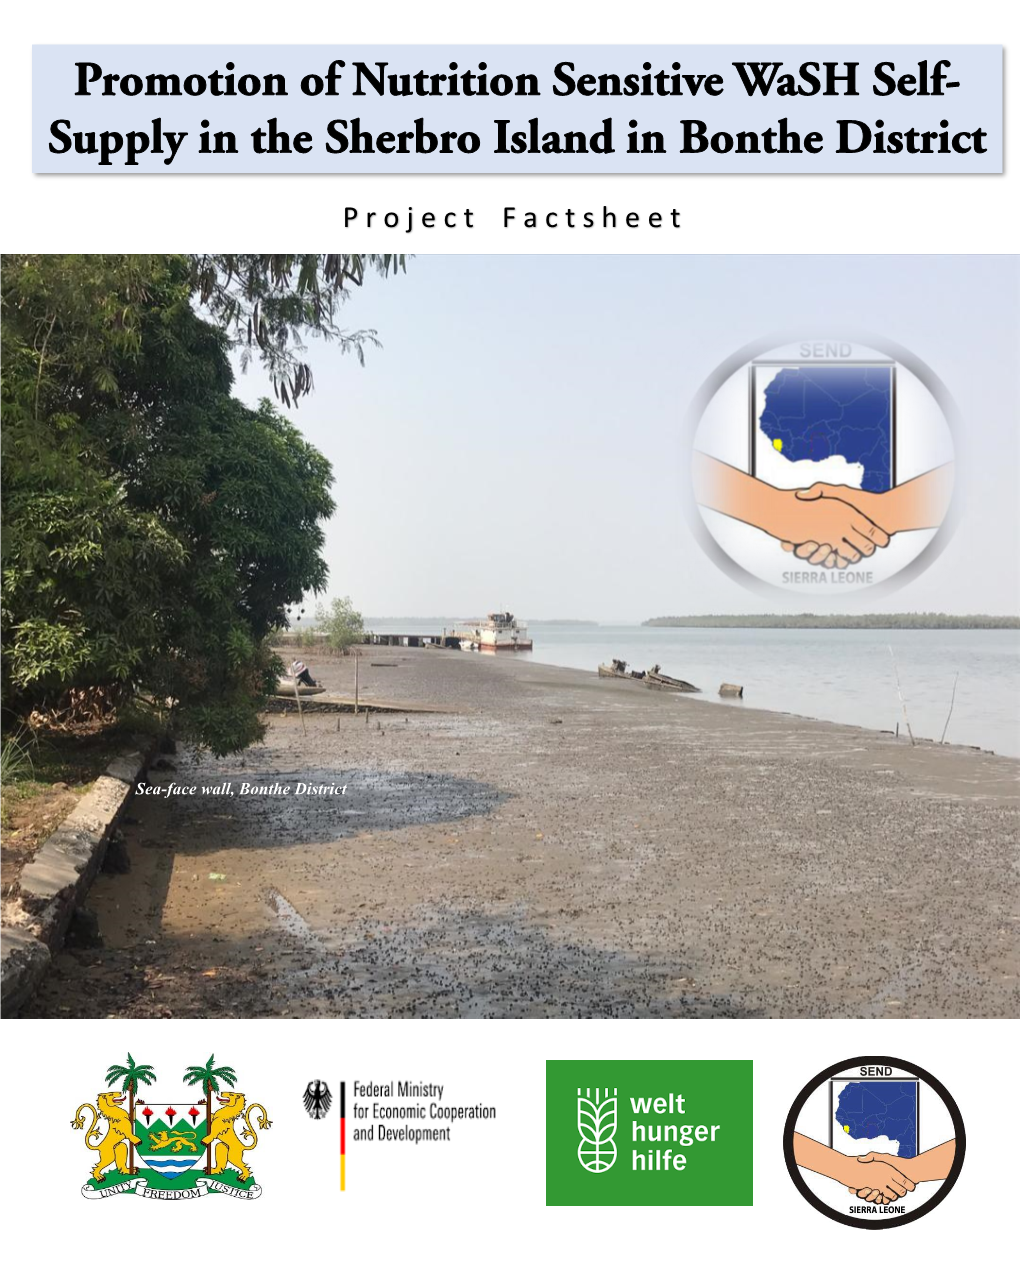 Promotion of Nutrition Sensitive Wash Self- Supply in the Sherbro Island in Bonthe District